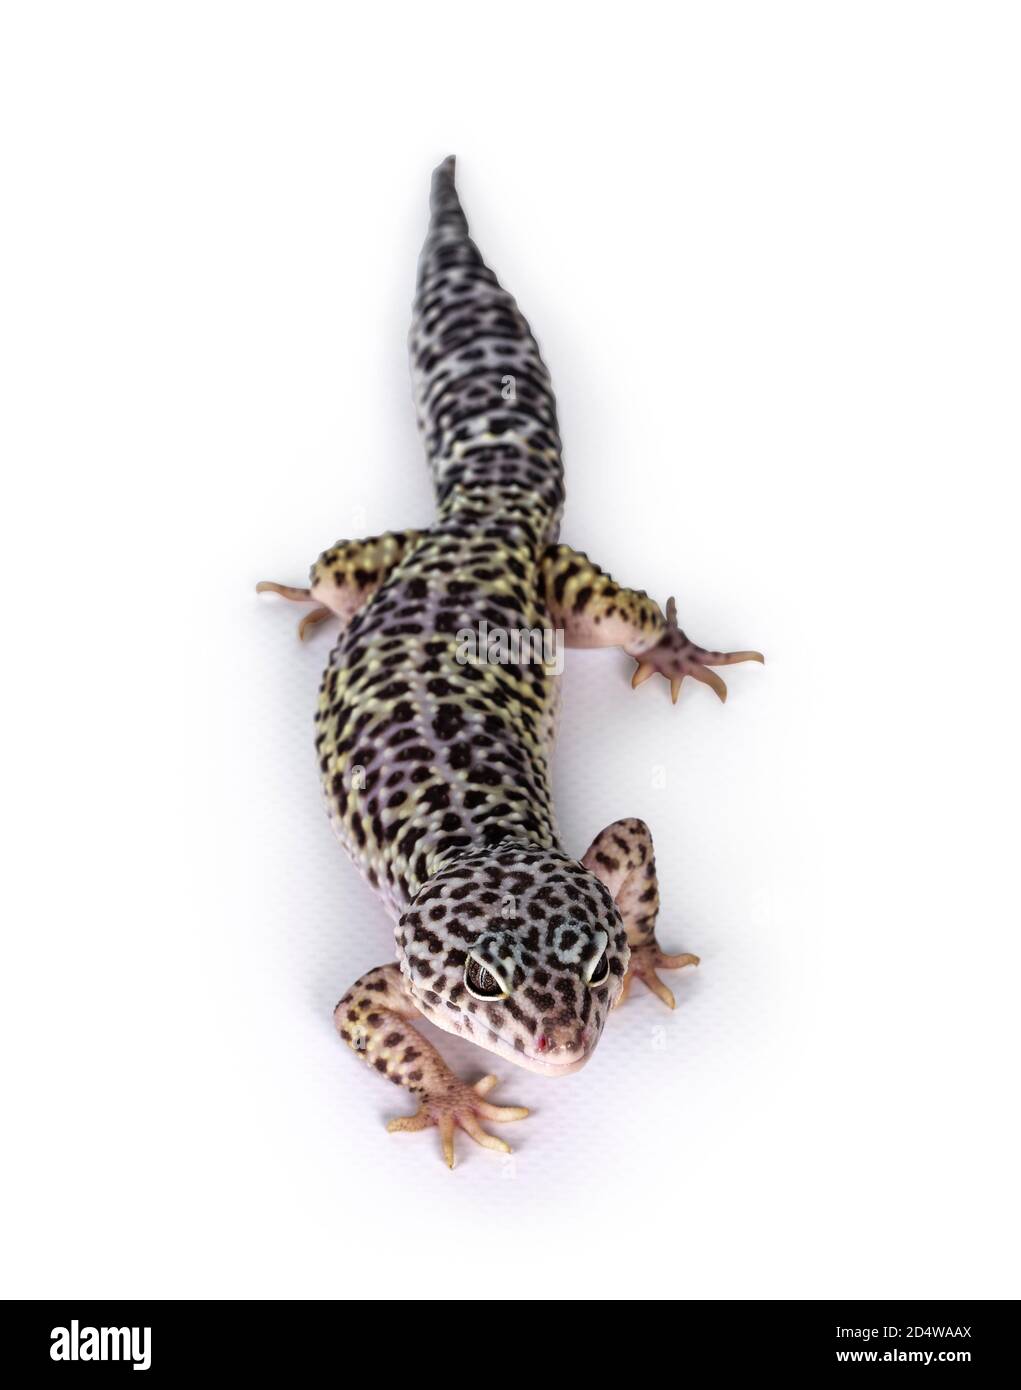 Top view of adult Mack snow leopard gecko aka Eublepharis macularius. Isolated on white background. Stock Photo